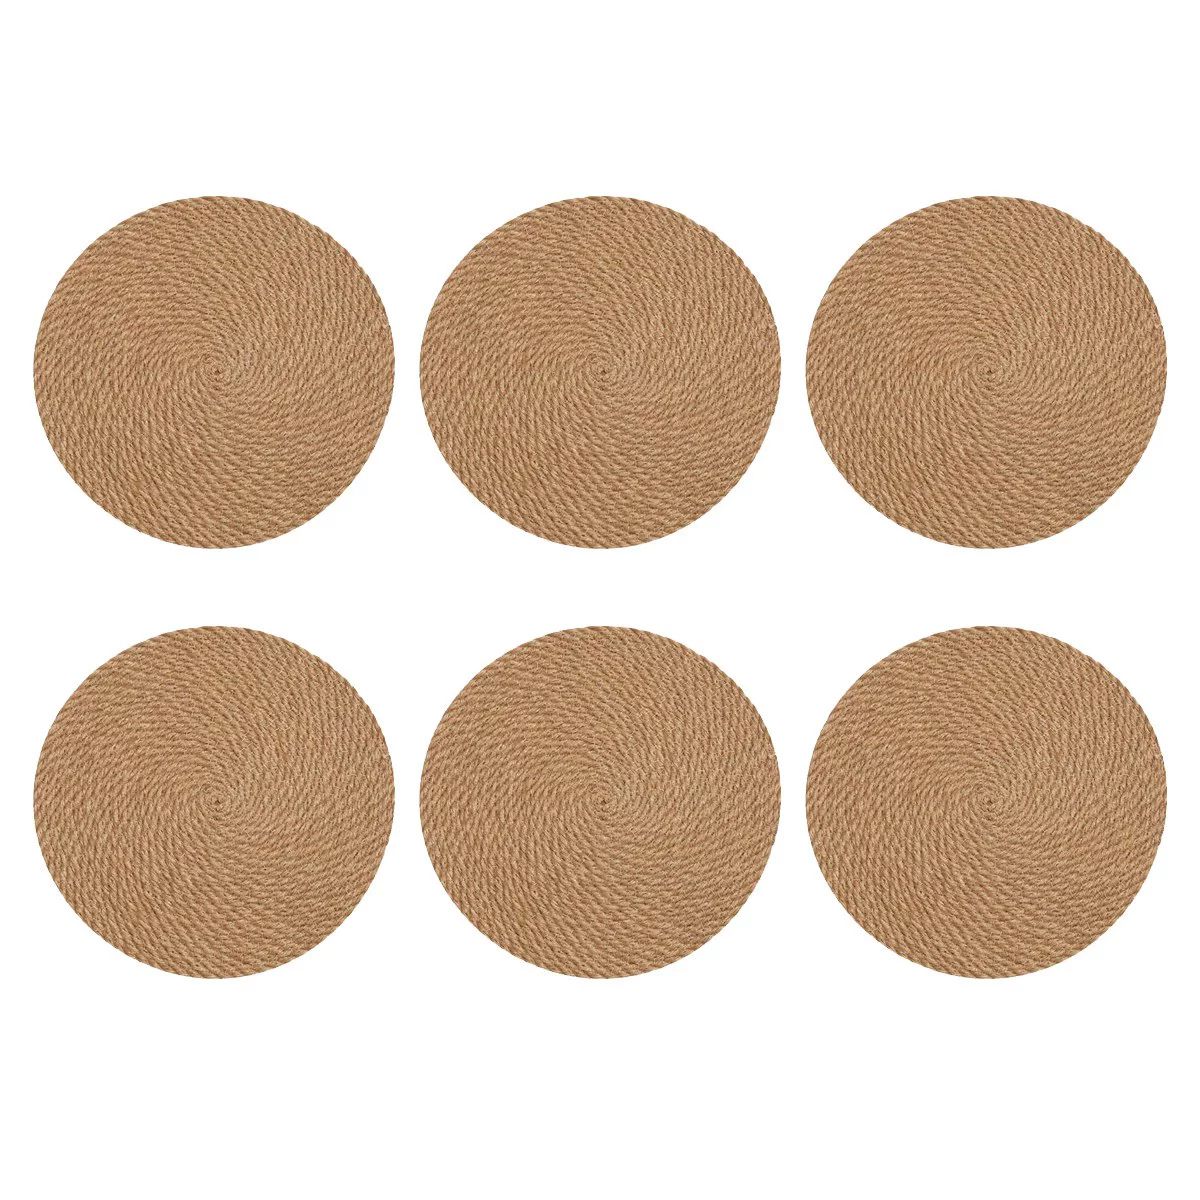 Round Braided Placemats Set of 6 Jute Handmade 7 Inch Heat Resistant Thick Hot Pads Mats Coaster ... | Walmart (US)